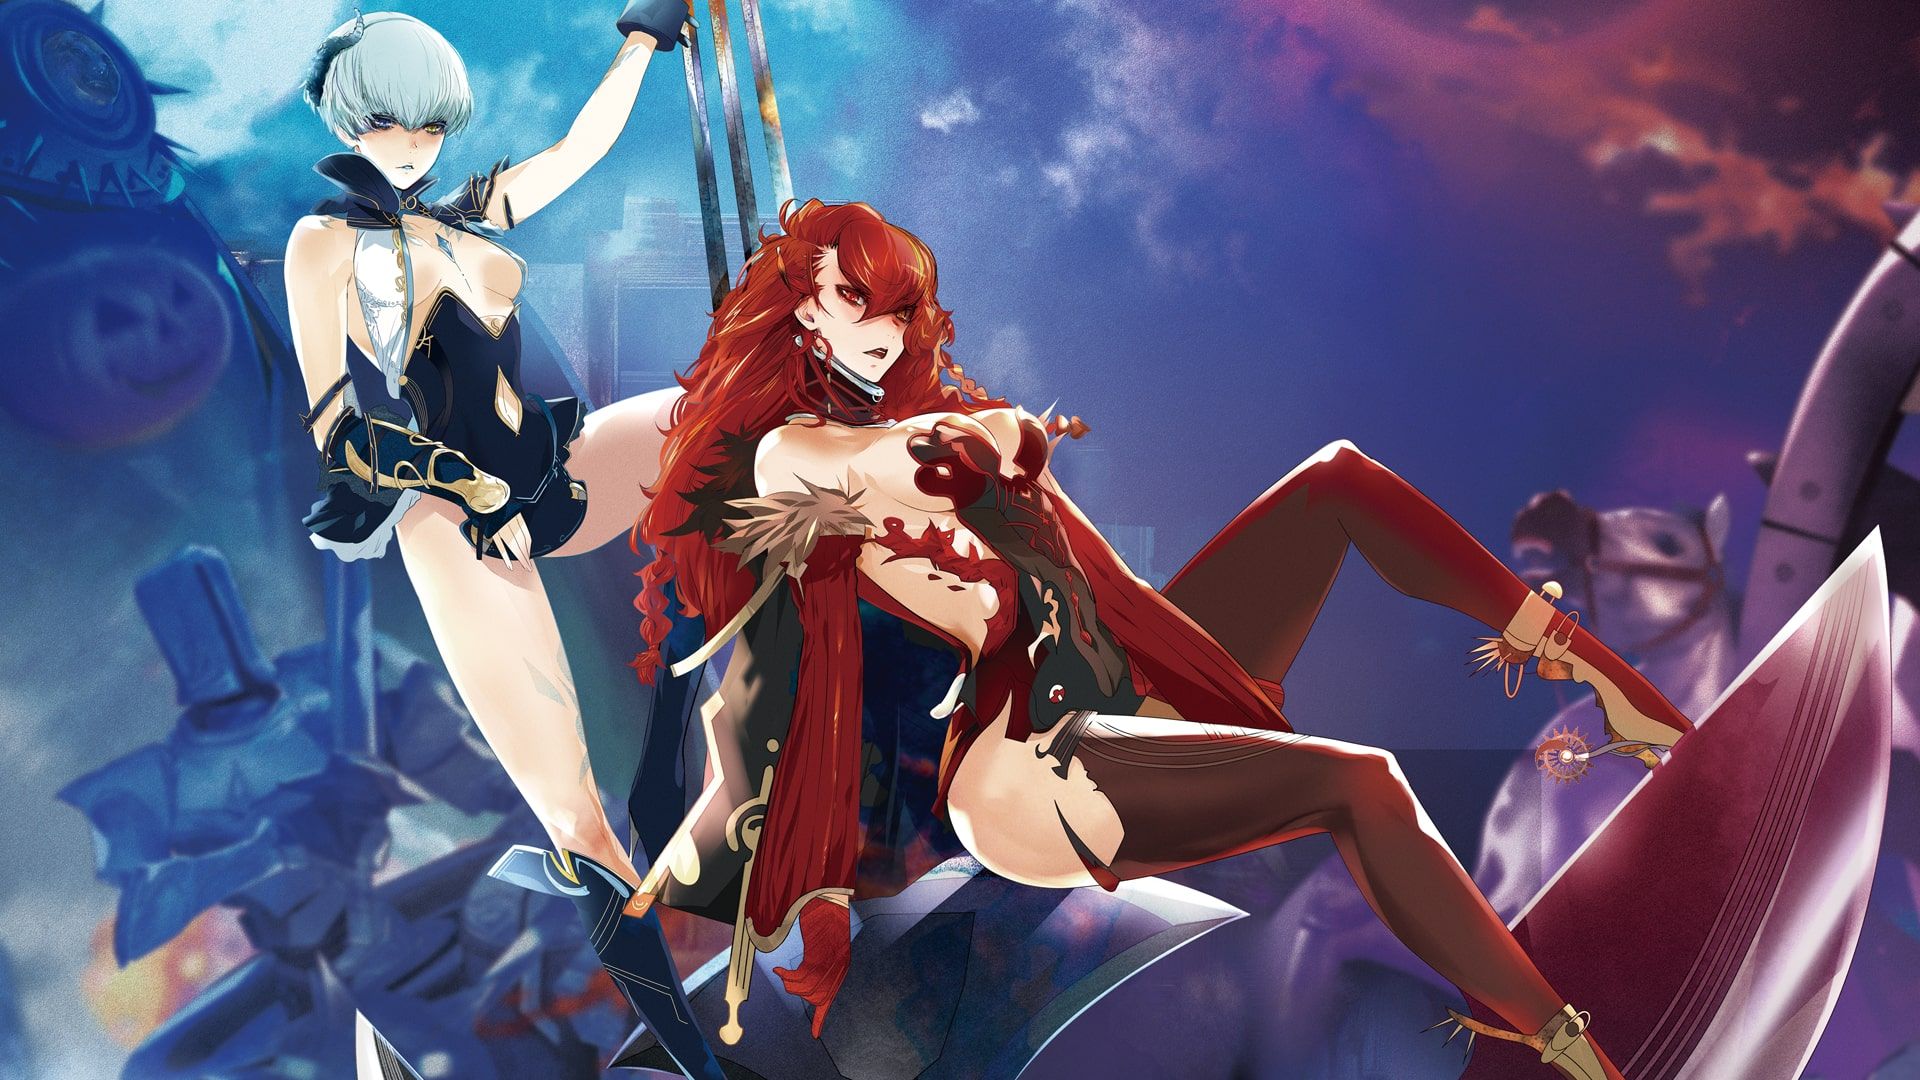 Deception IV: The Nightmare Princess cover image